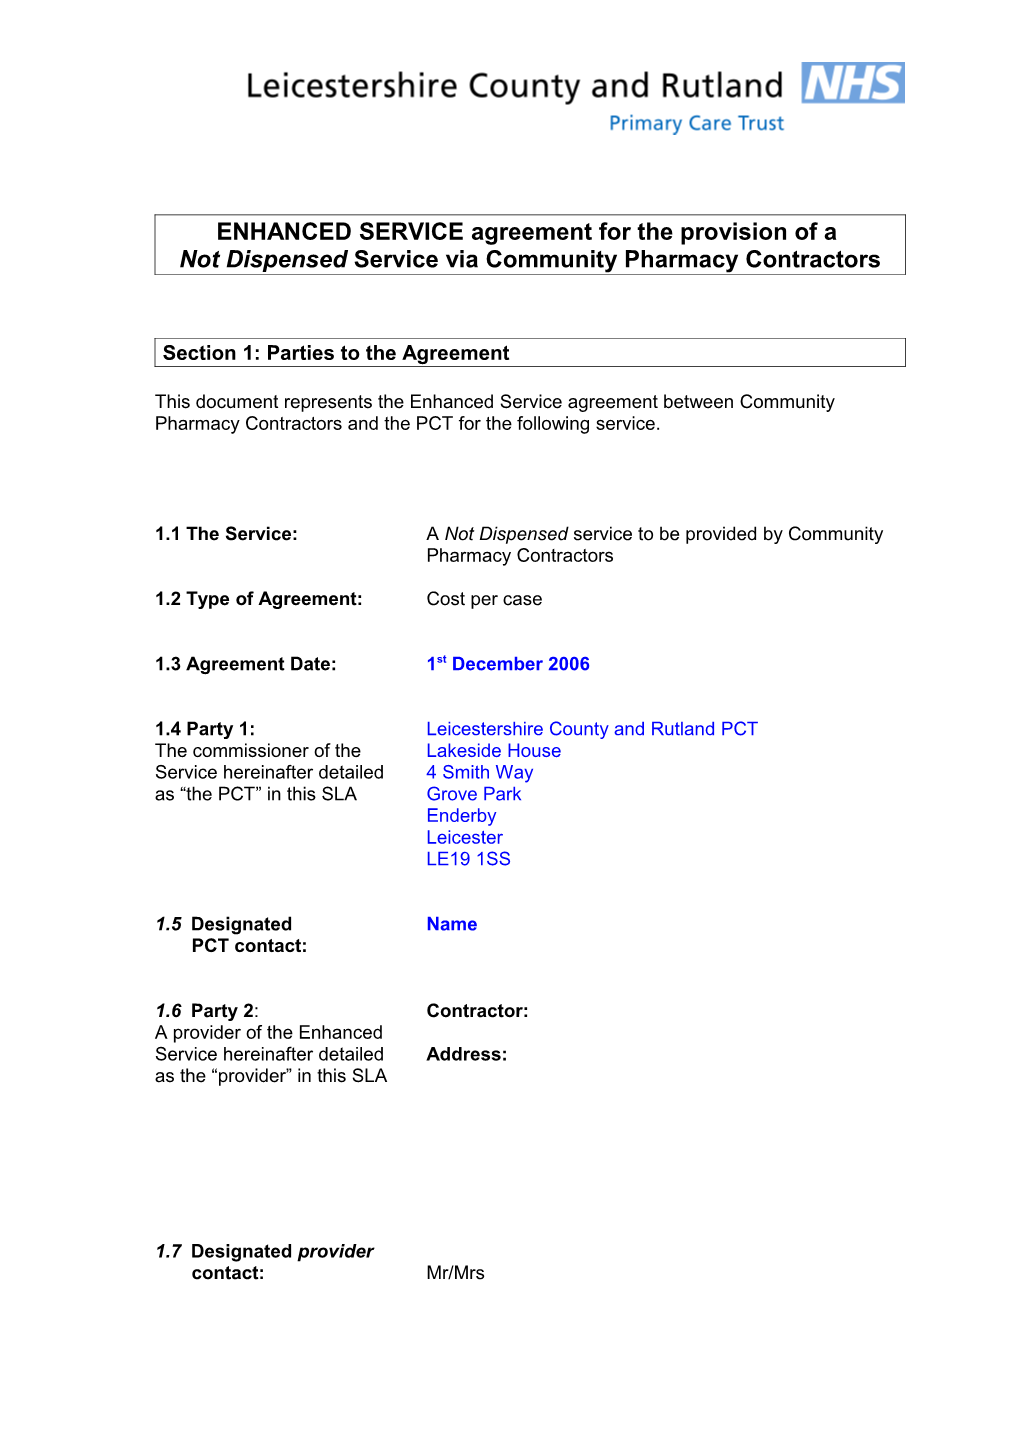 ENHANCED SERVICE Agreement for the Provision of A